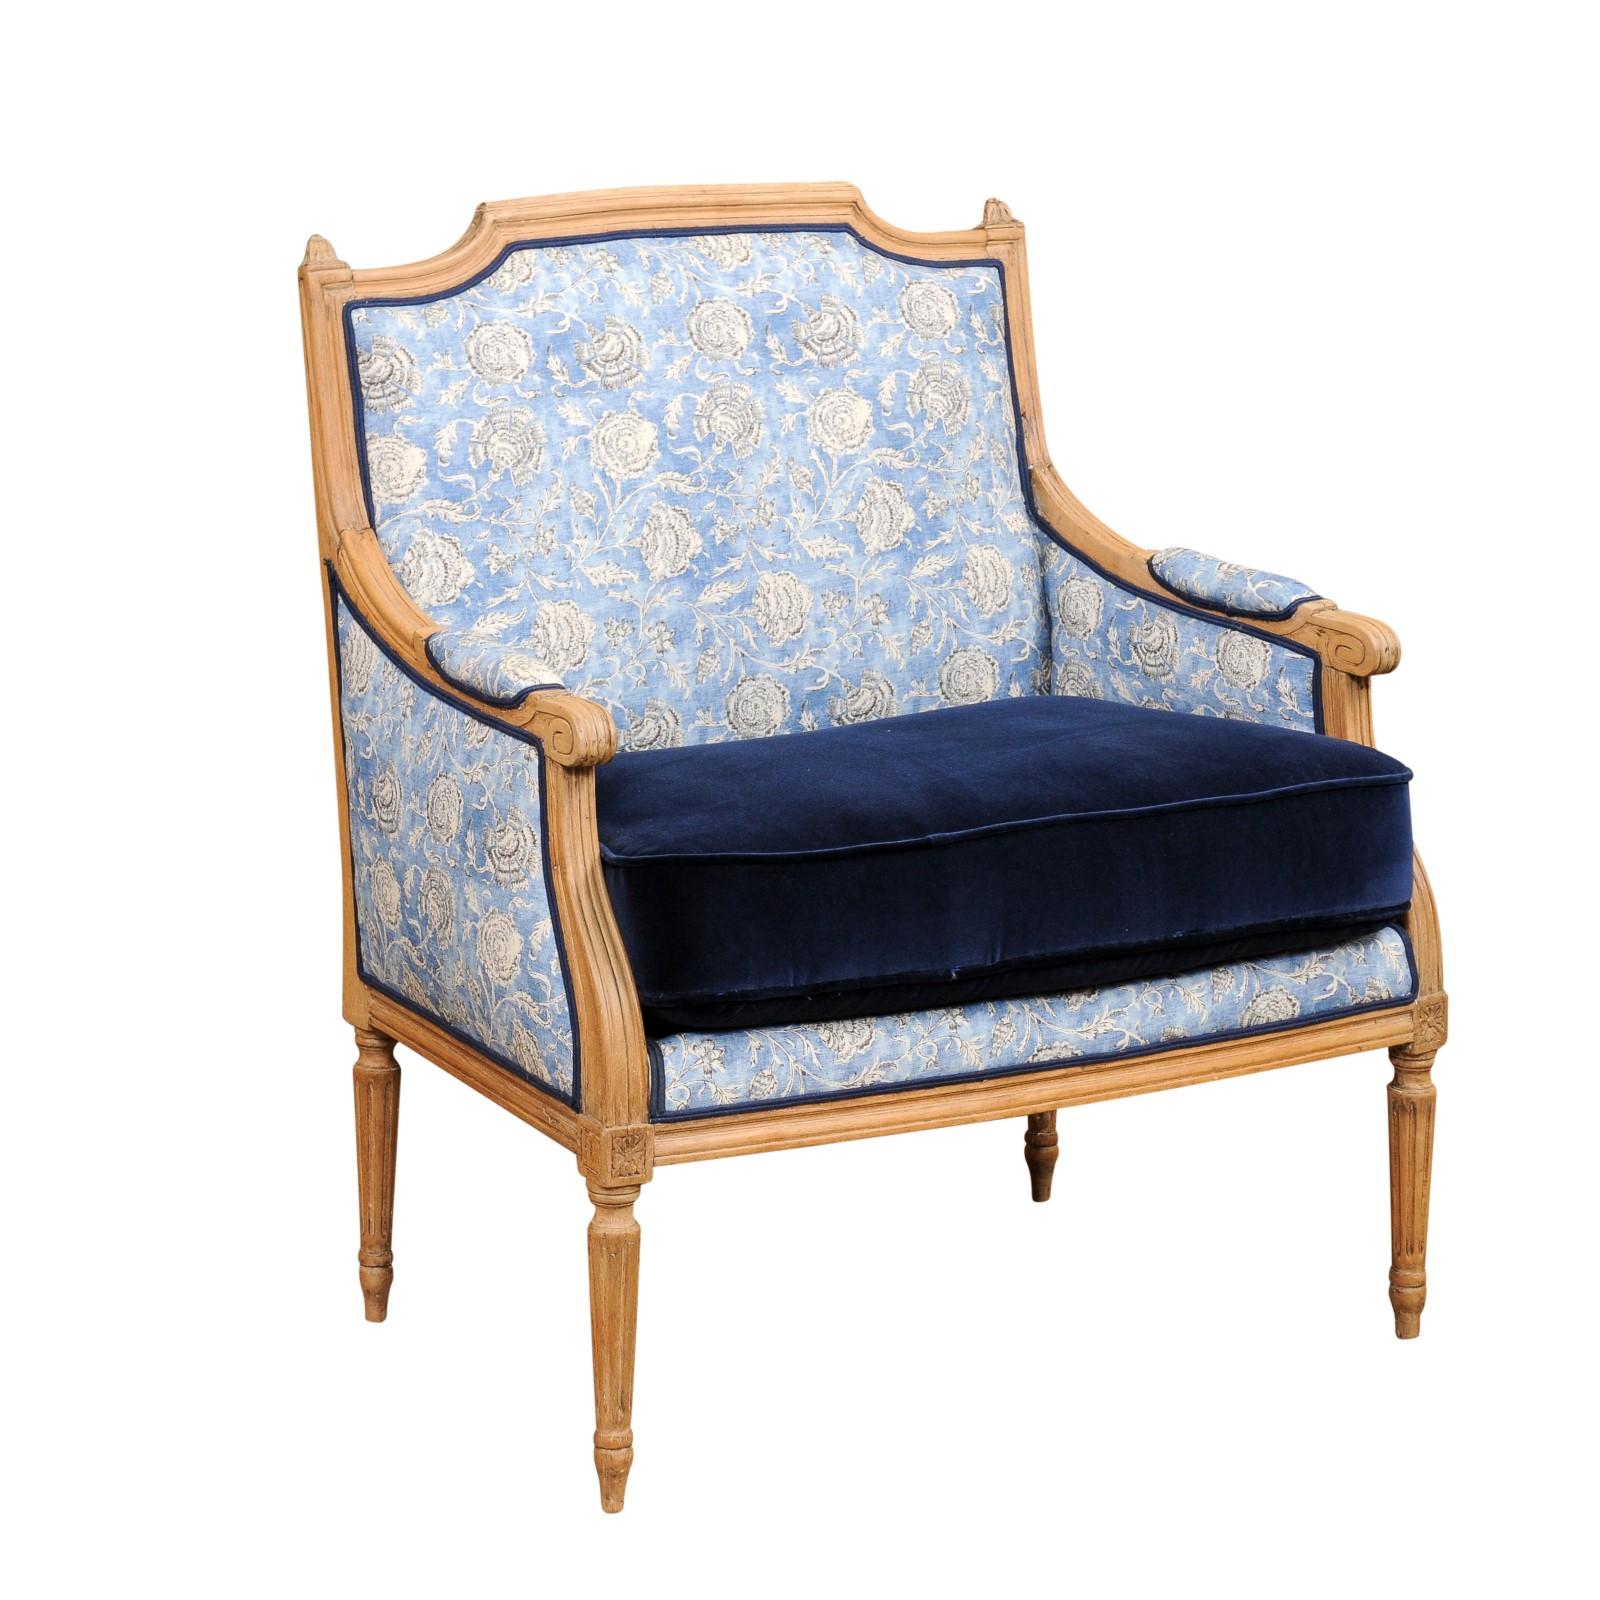 A French Louis XVI style bleached walnut marquise bergère chair from the 19th century, with slanted rectangular back, petite carved finials, scrolling knuckles on the arms, fluted legs and used blue upholstery in fair condition with custom velvet